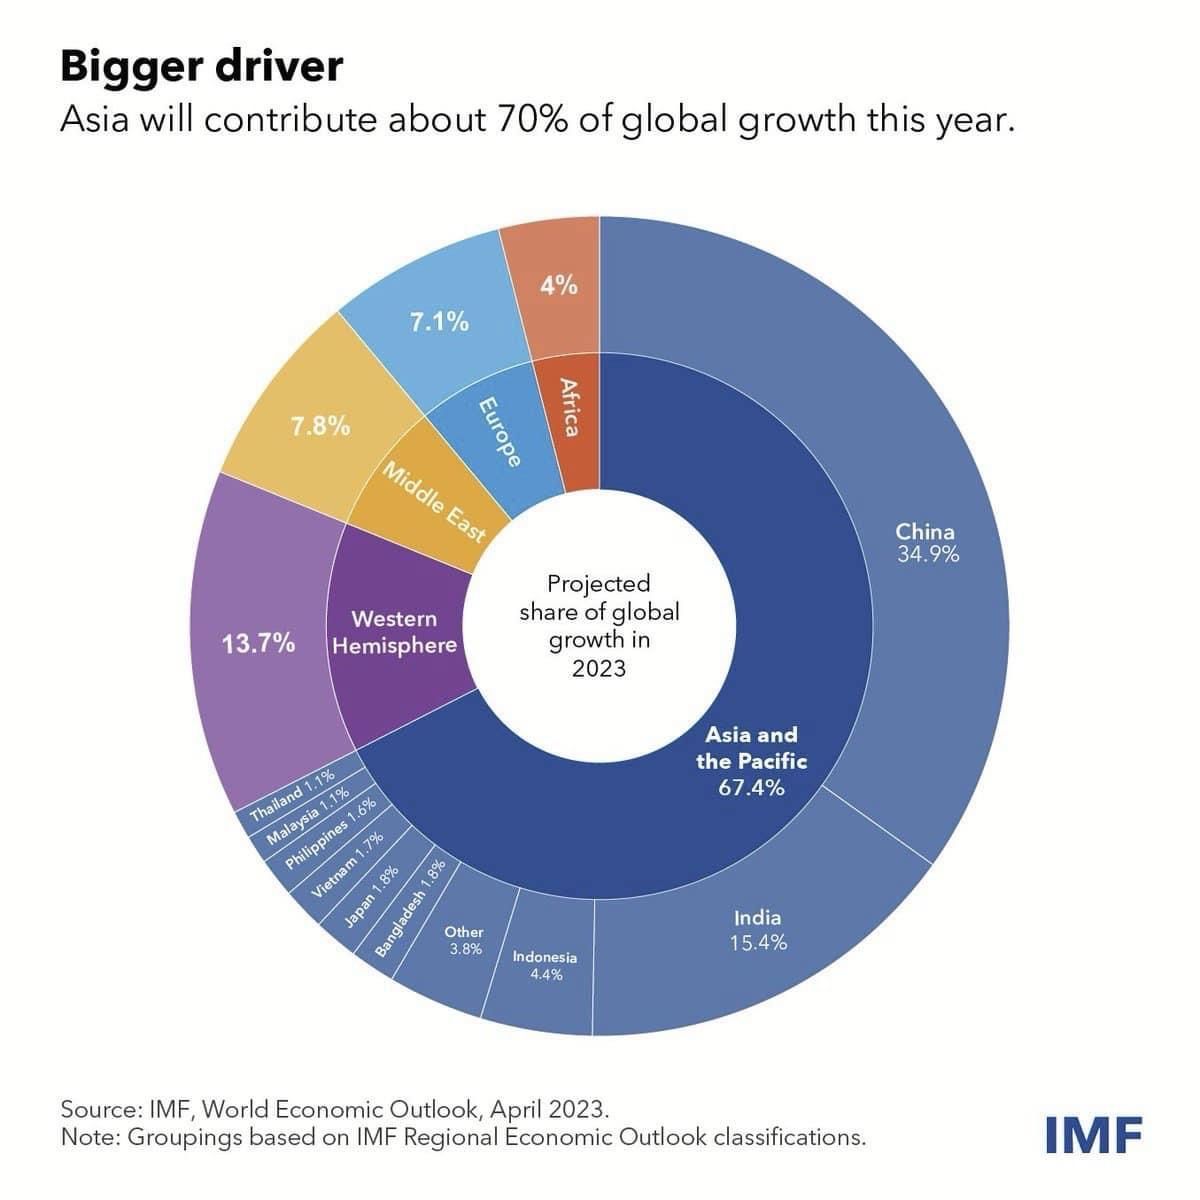 China and India will contribute about 1/2 or 50.3% of all global growth in 2023 according to IMF.